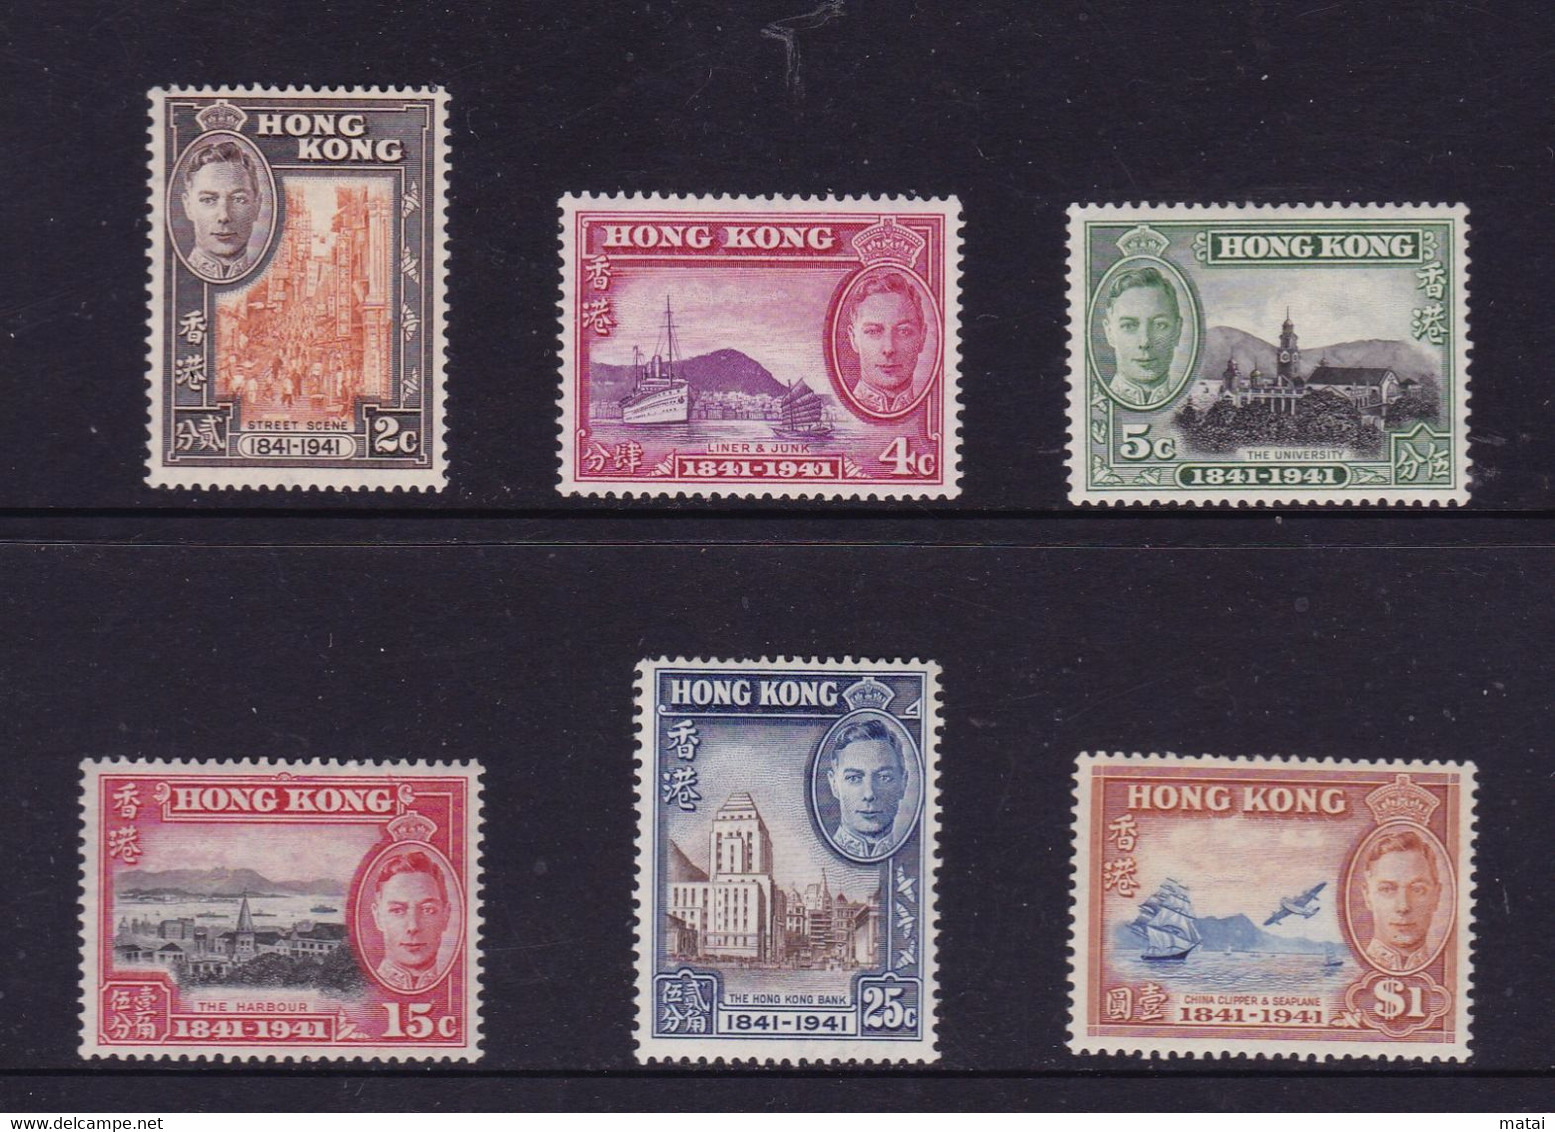 HONG KONG 1941, "Centenary Of British Occupation", Serie Mint, Trace Of Hinge - 1941-45 Occupazione Giapponese